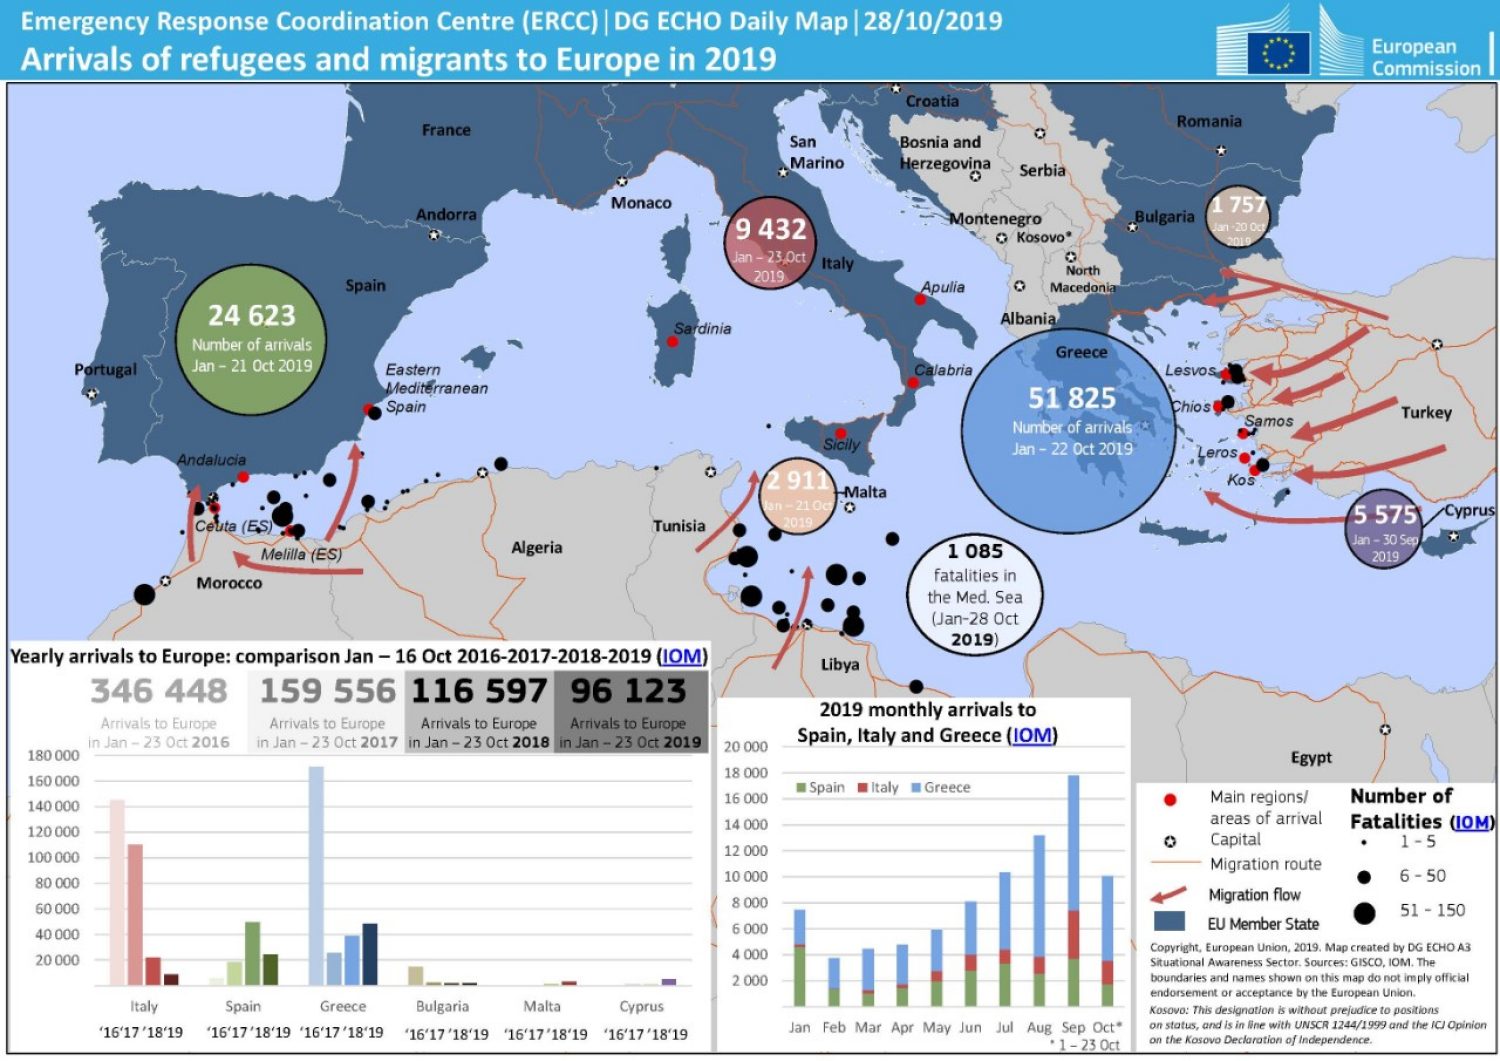 2019 arrivals to Europe (from European Commission)